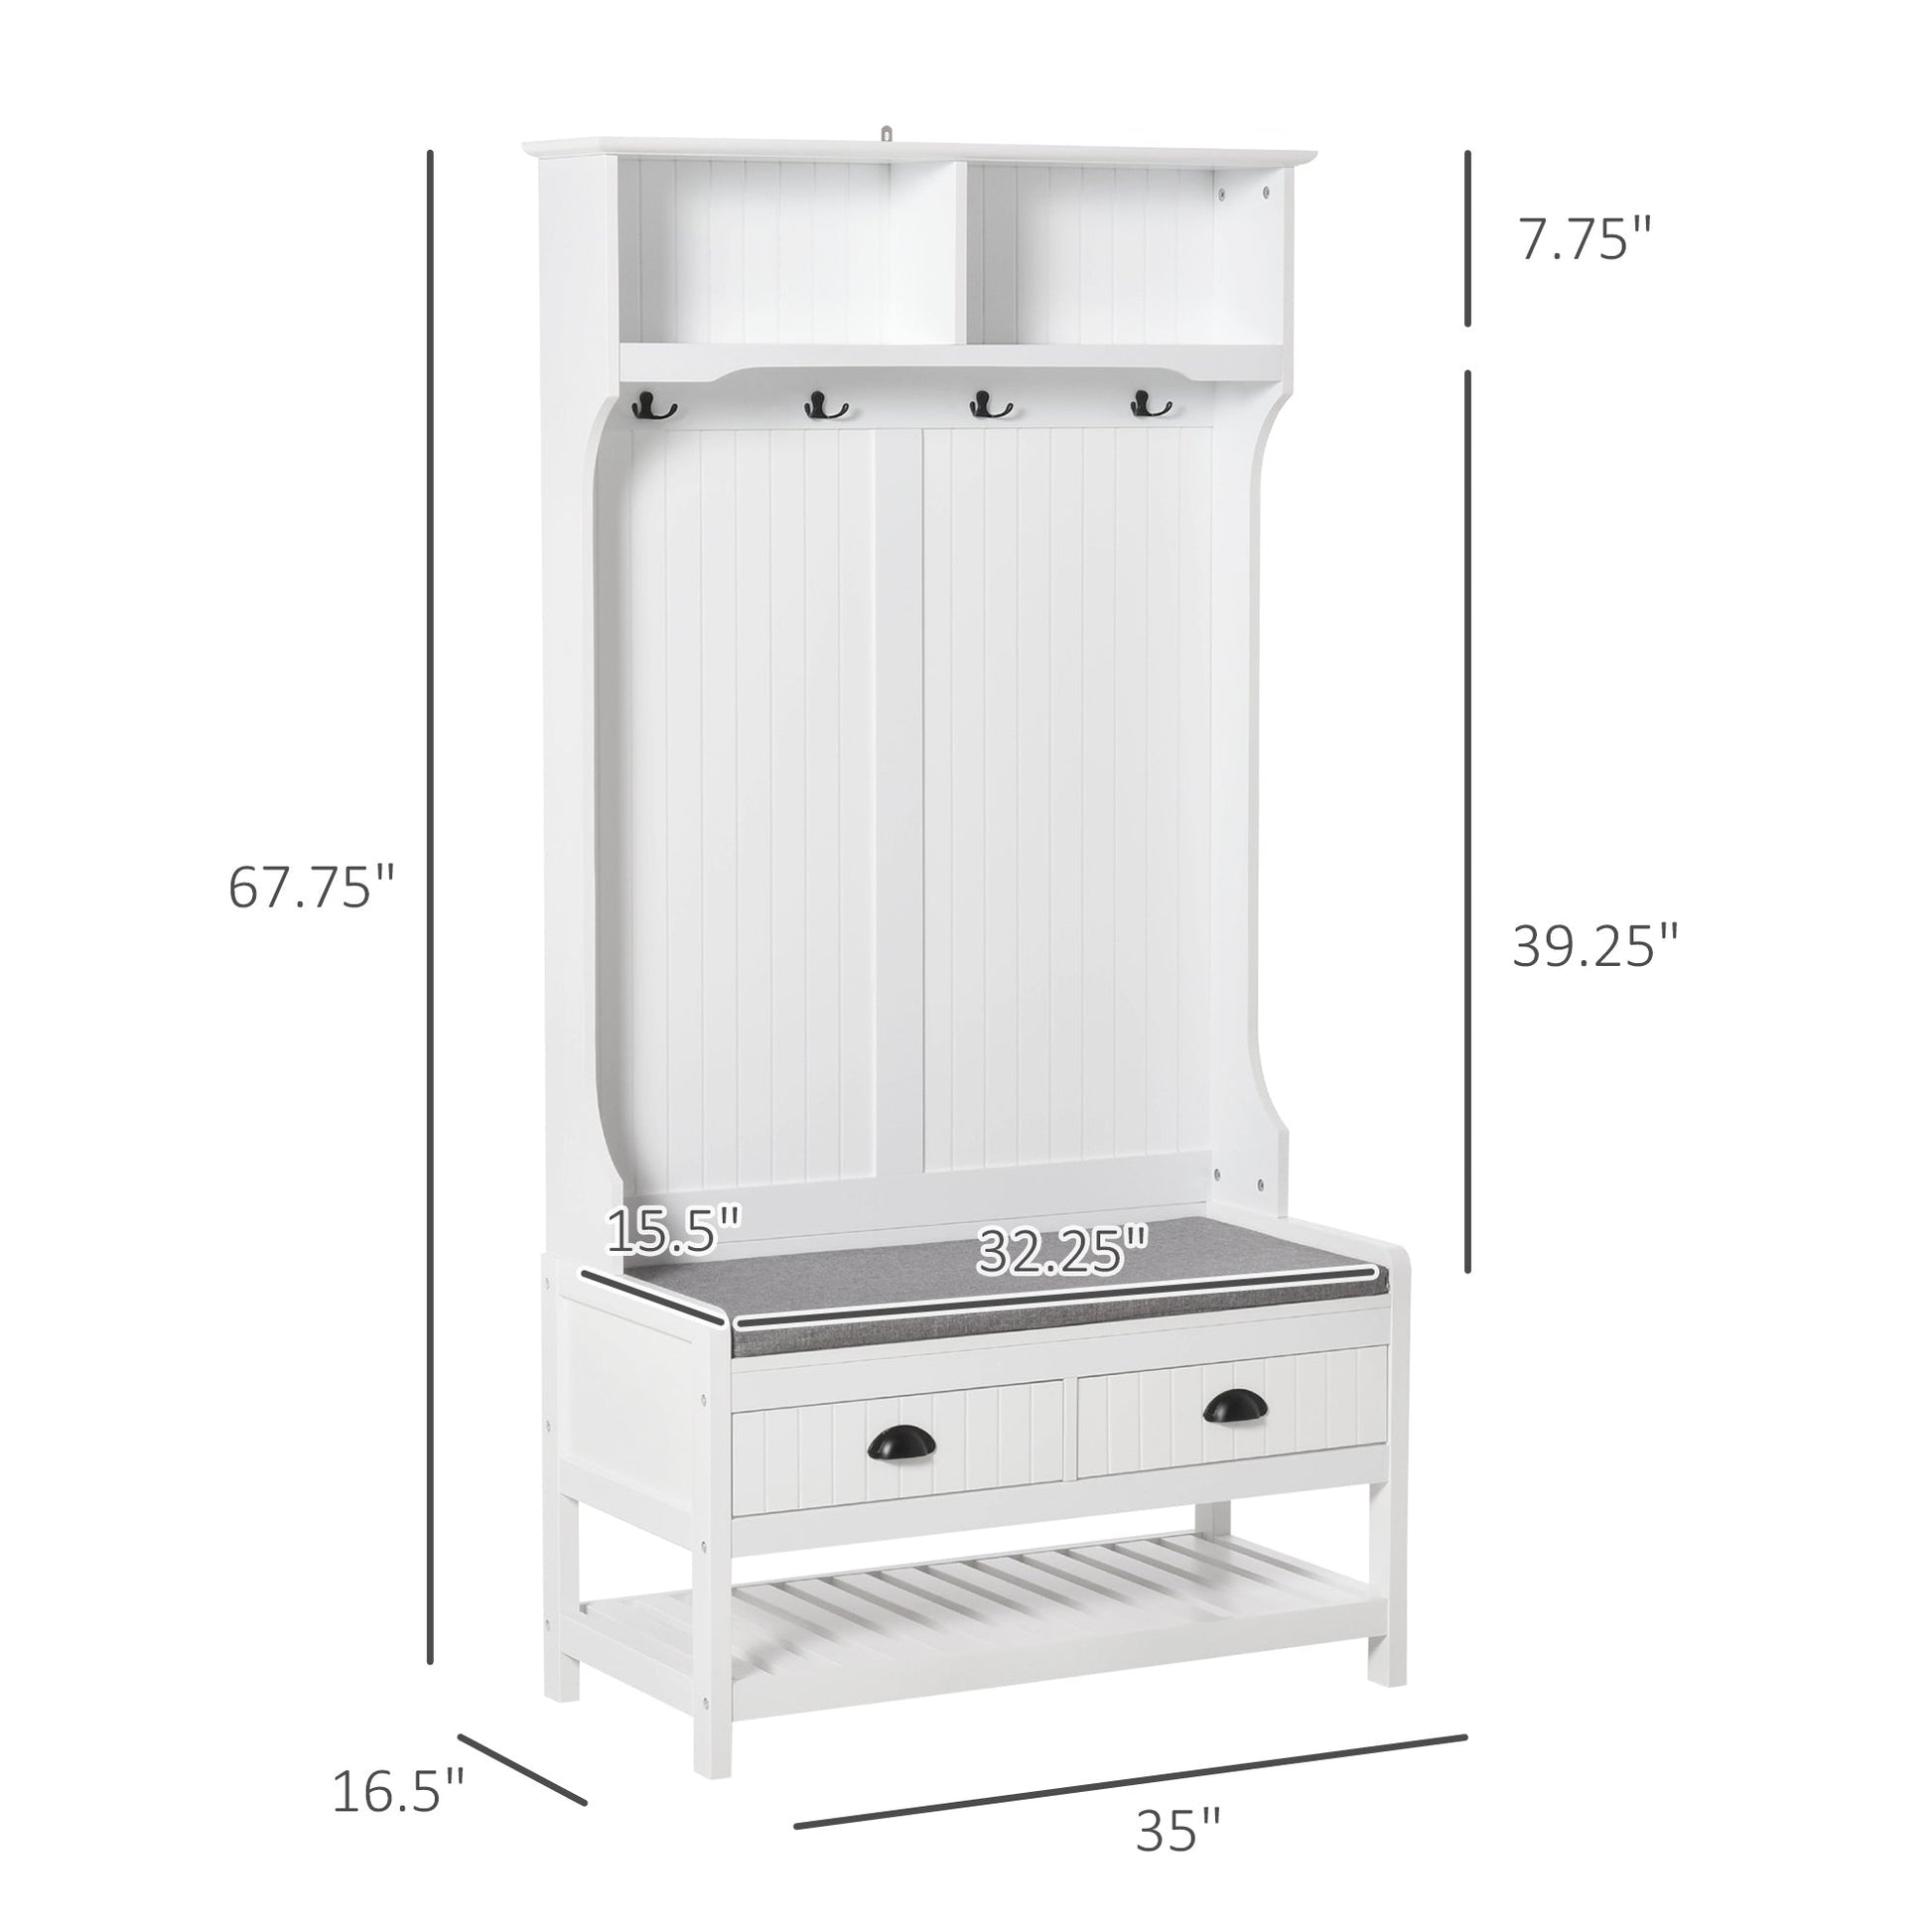 Clothing Storage, Coat Stand, Shoe Storage Bench Organizer with Coat Hanger, Drawers Padded Seat Cushion for Entryway Hallway Foyer Bedroom Living Room White at Gallery Canada